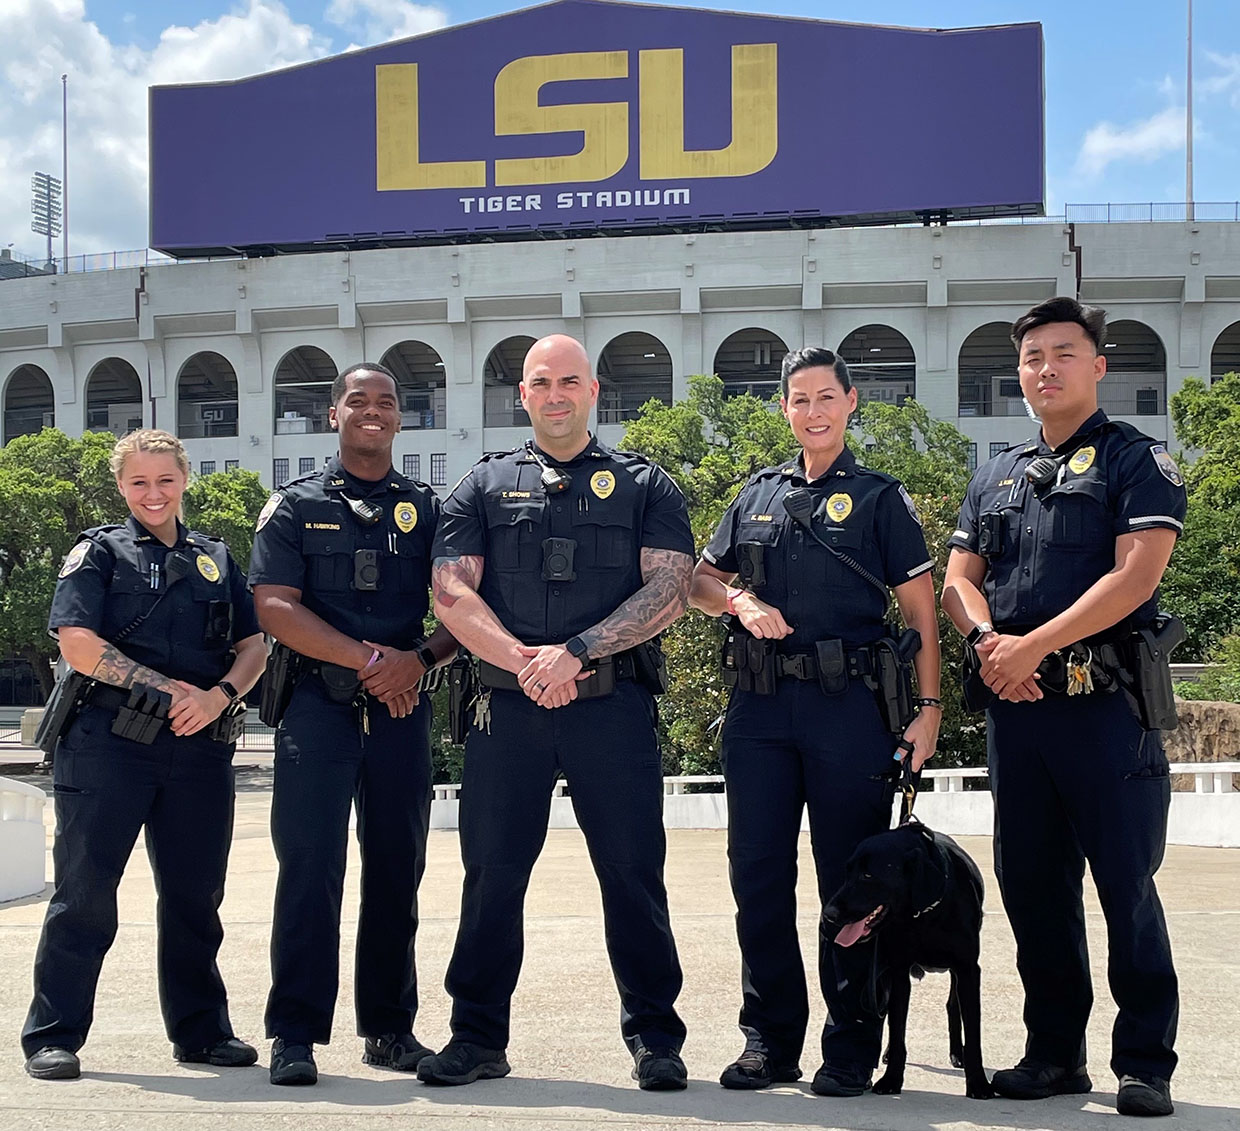 LSU Police officers and police dog, Tiger Stadium in background.